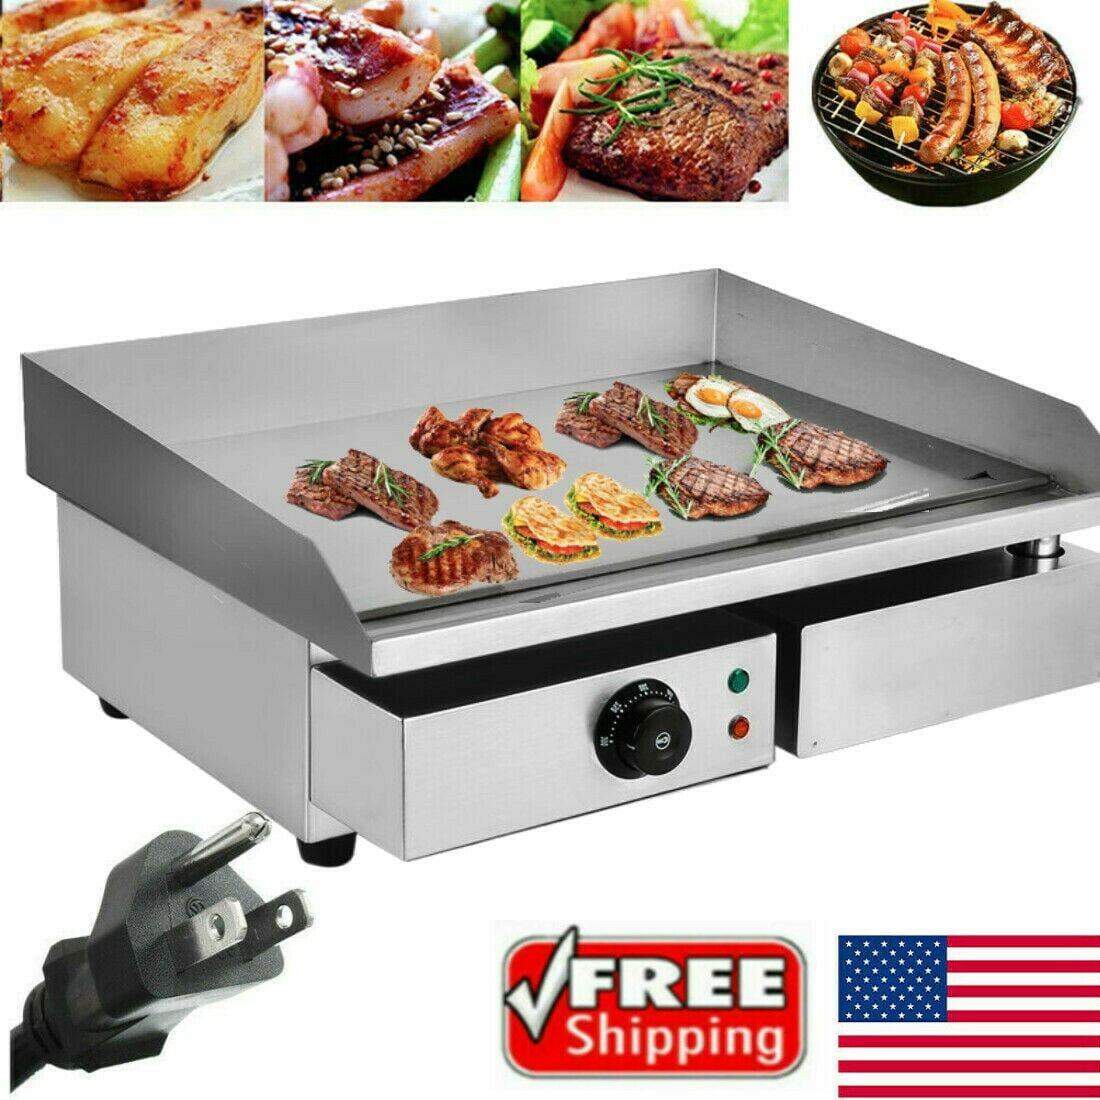 Electric Countertop Griddle 22 Electric Countertop Flat Top Griddle 3000W Non-Stick Commercial Restaurant Teppanyaki Grill Stainless Steel Adjustable Temperature Control 122°F-572°F USA